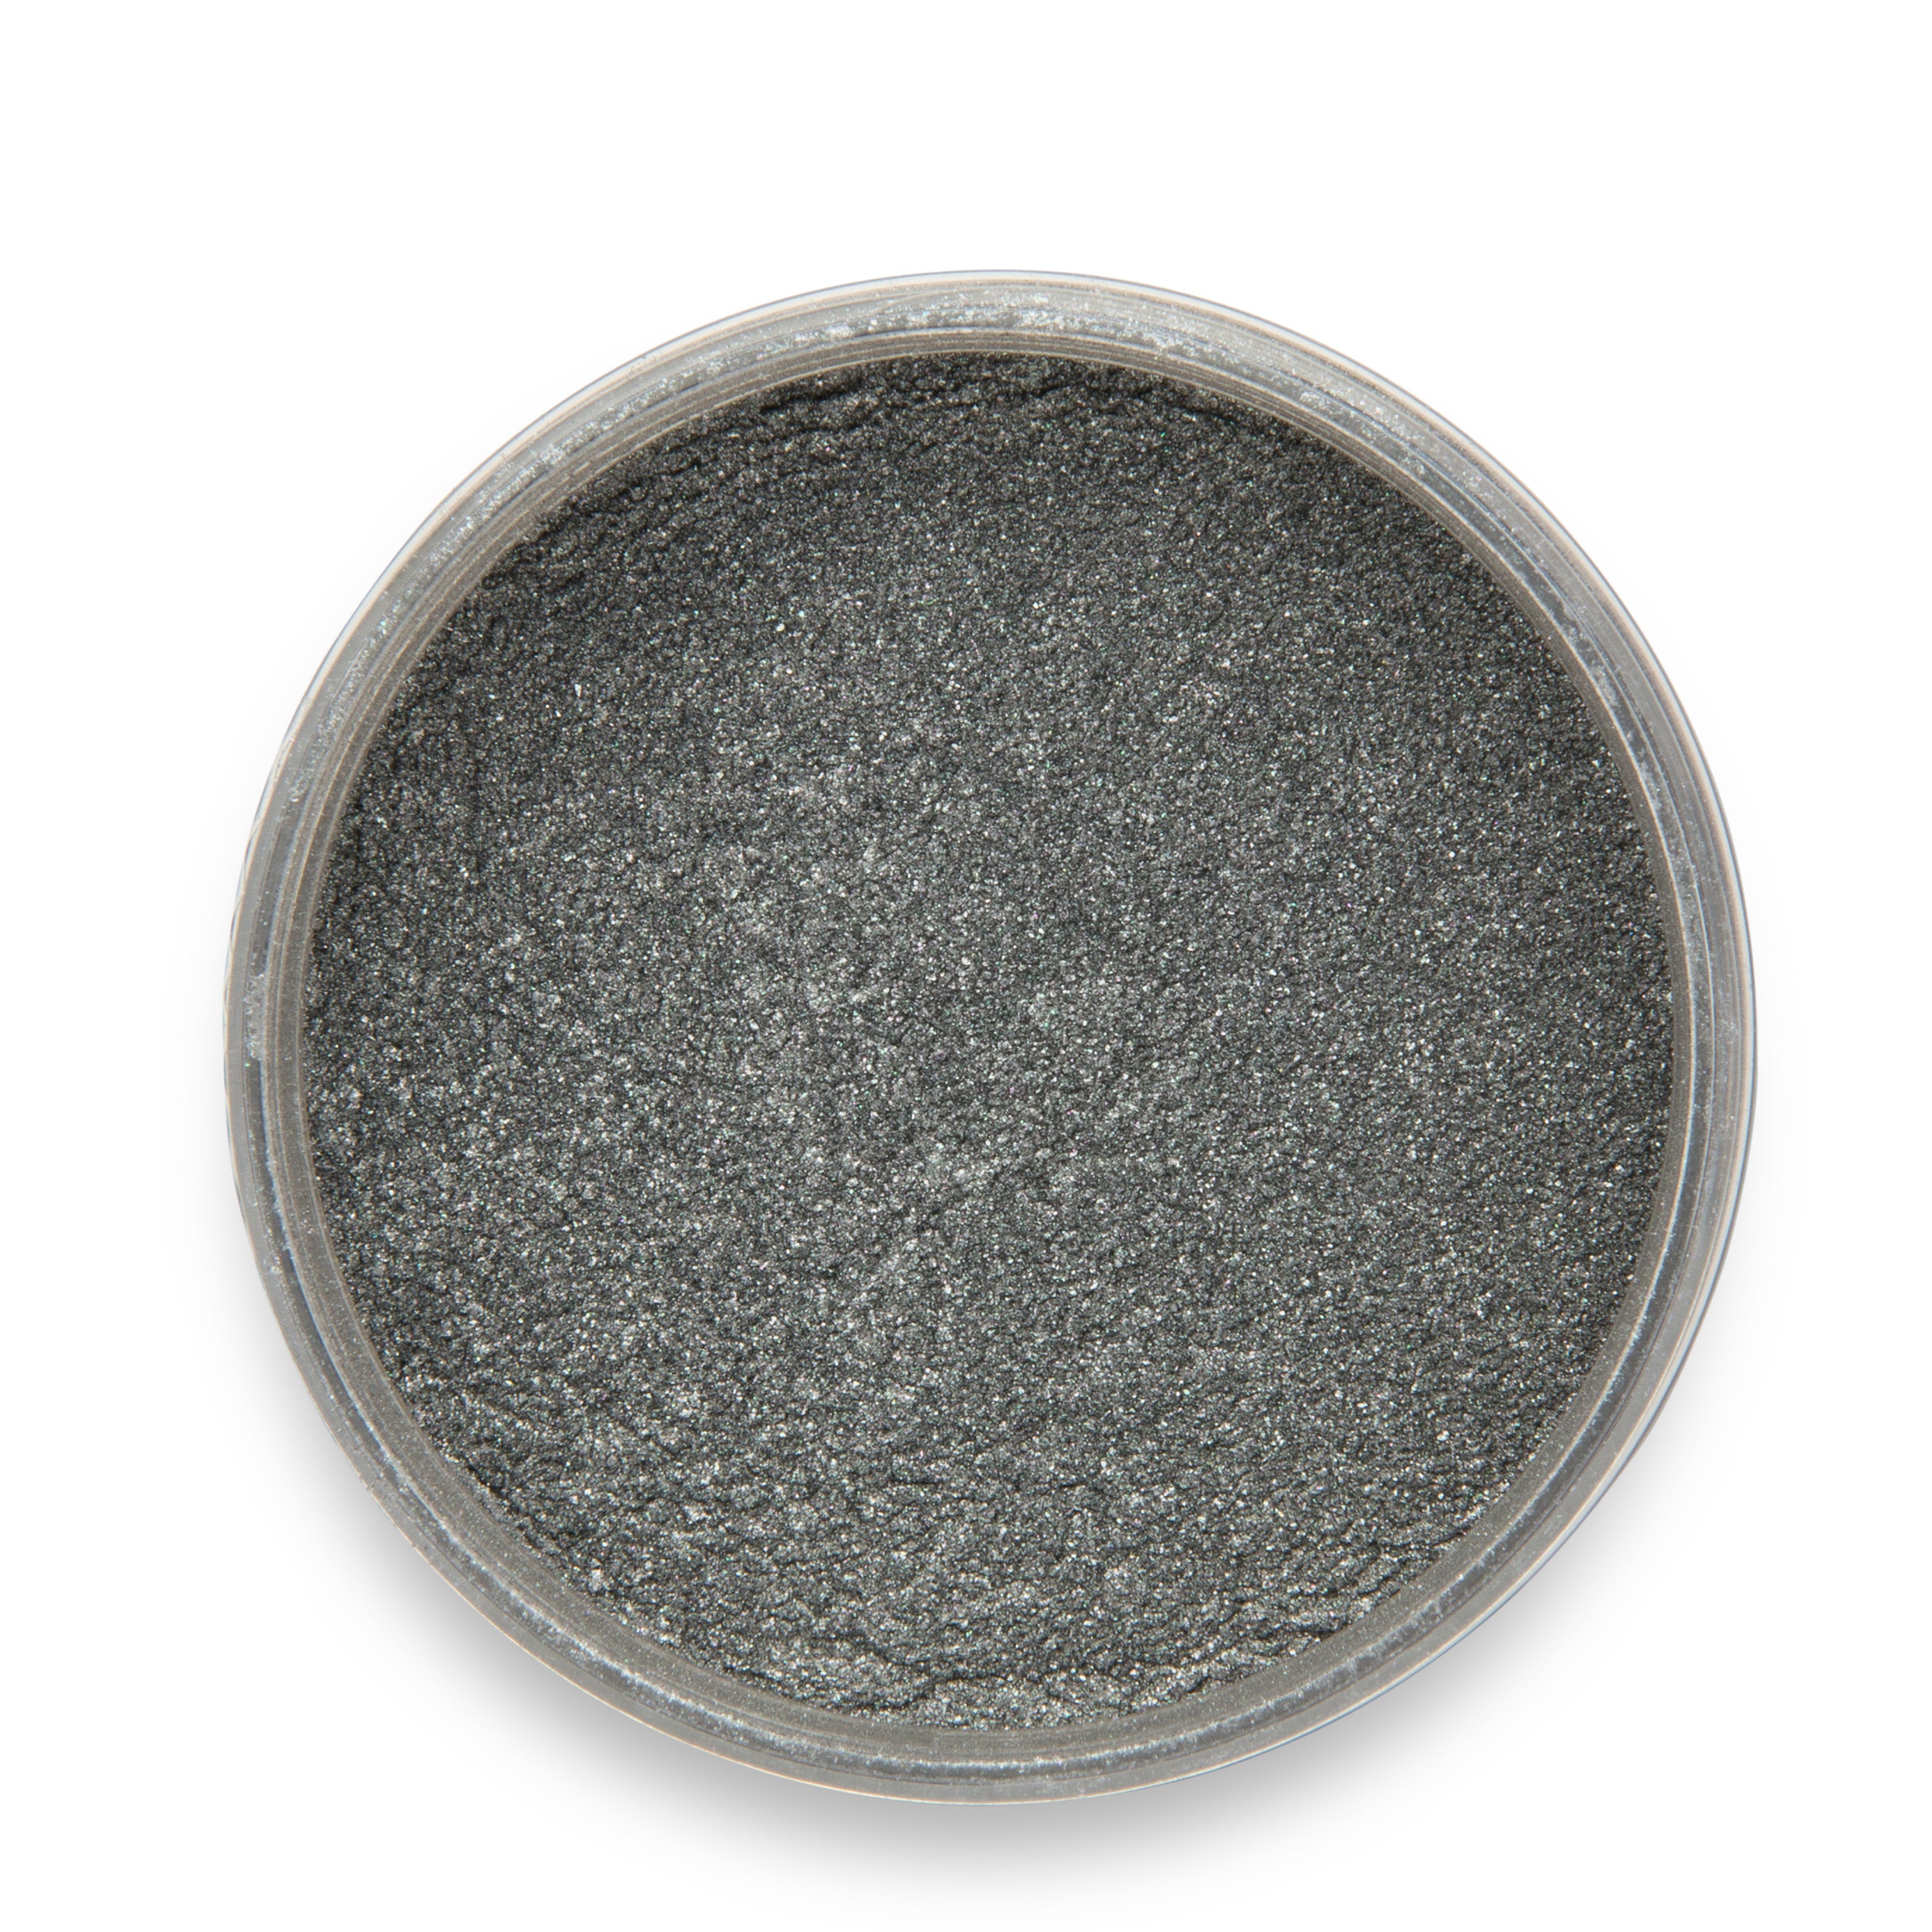 Steel Power Gray Epoxy Color Powder by Pigmently